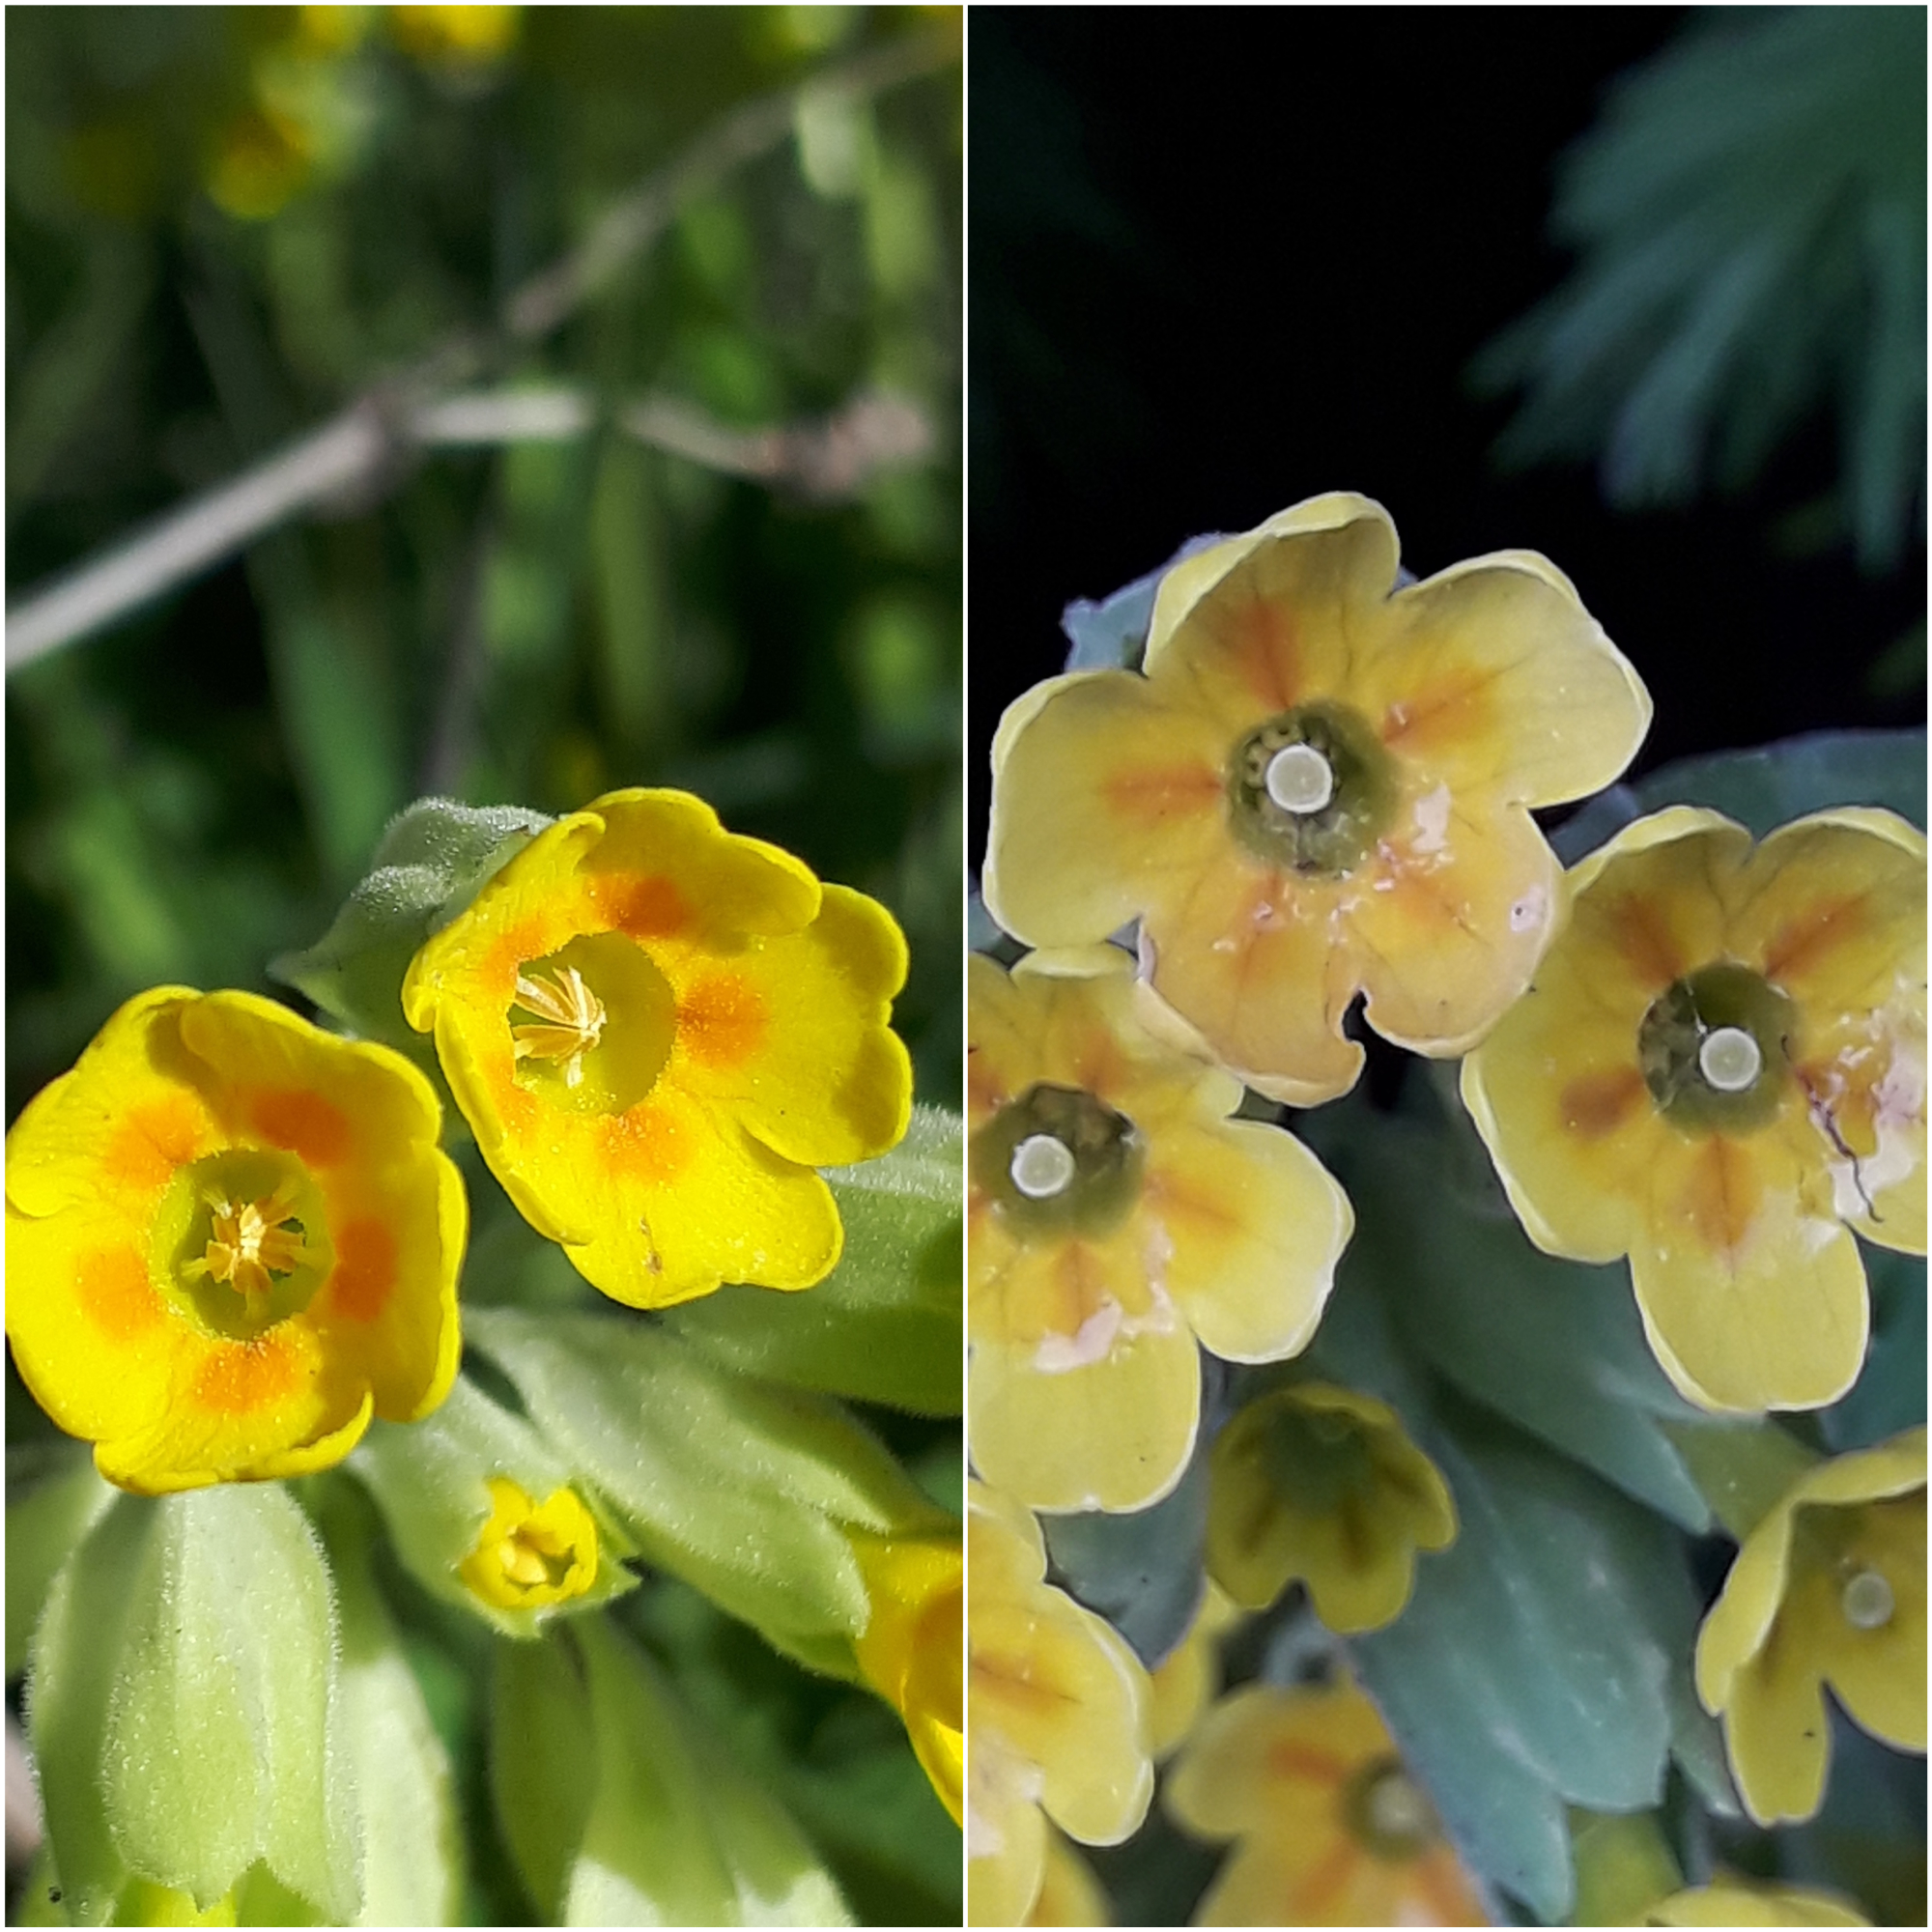 The two types of cowslip: S morph (left) with stamen or male parts of the flower easy to spot, and L morph (right) with female part or stigma visible (Plantlife/PA)